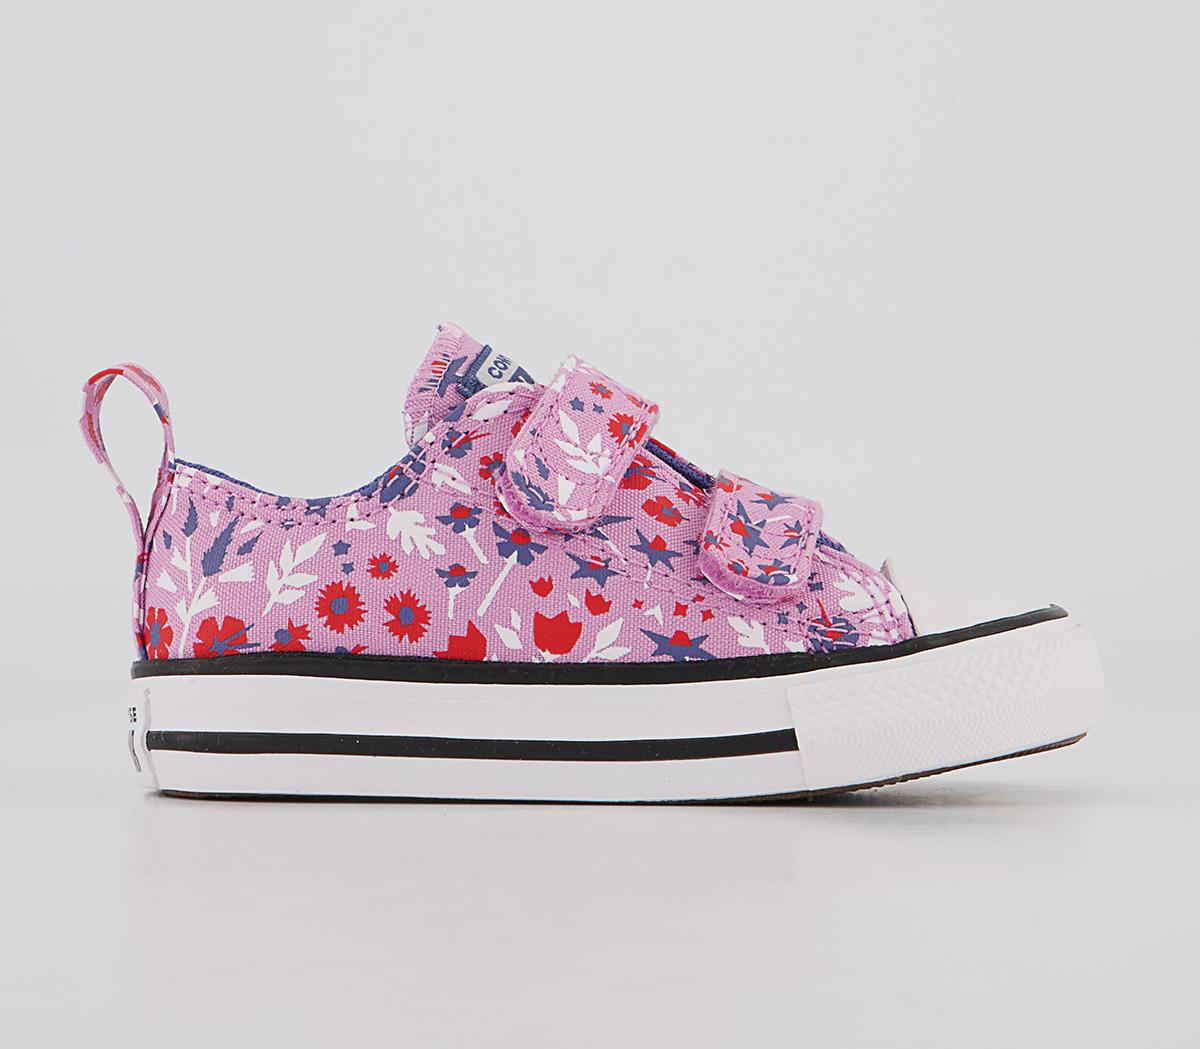 ConverseAll Star 2vlace TrainersBeyond Pink Washed Indigo Floral